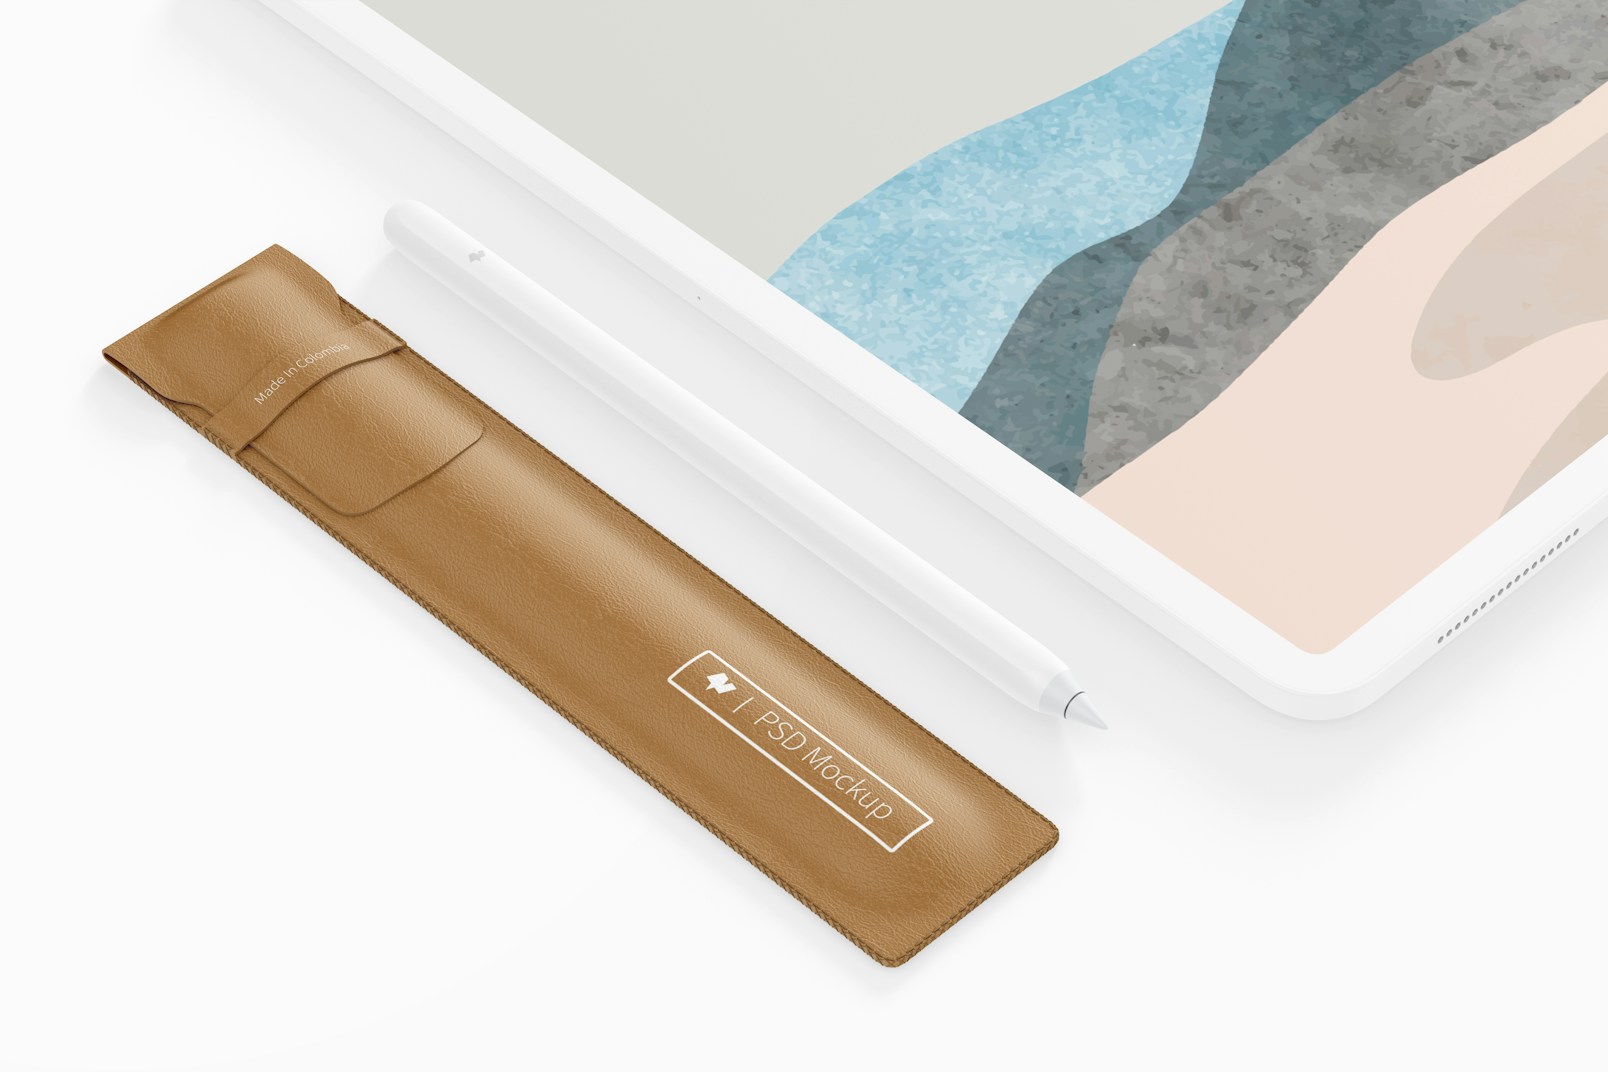 Leather Case for Apple Pencil Mockup, with iPad